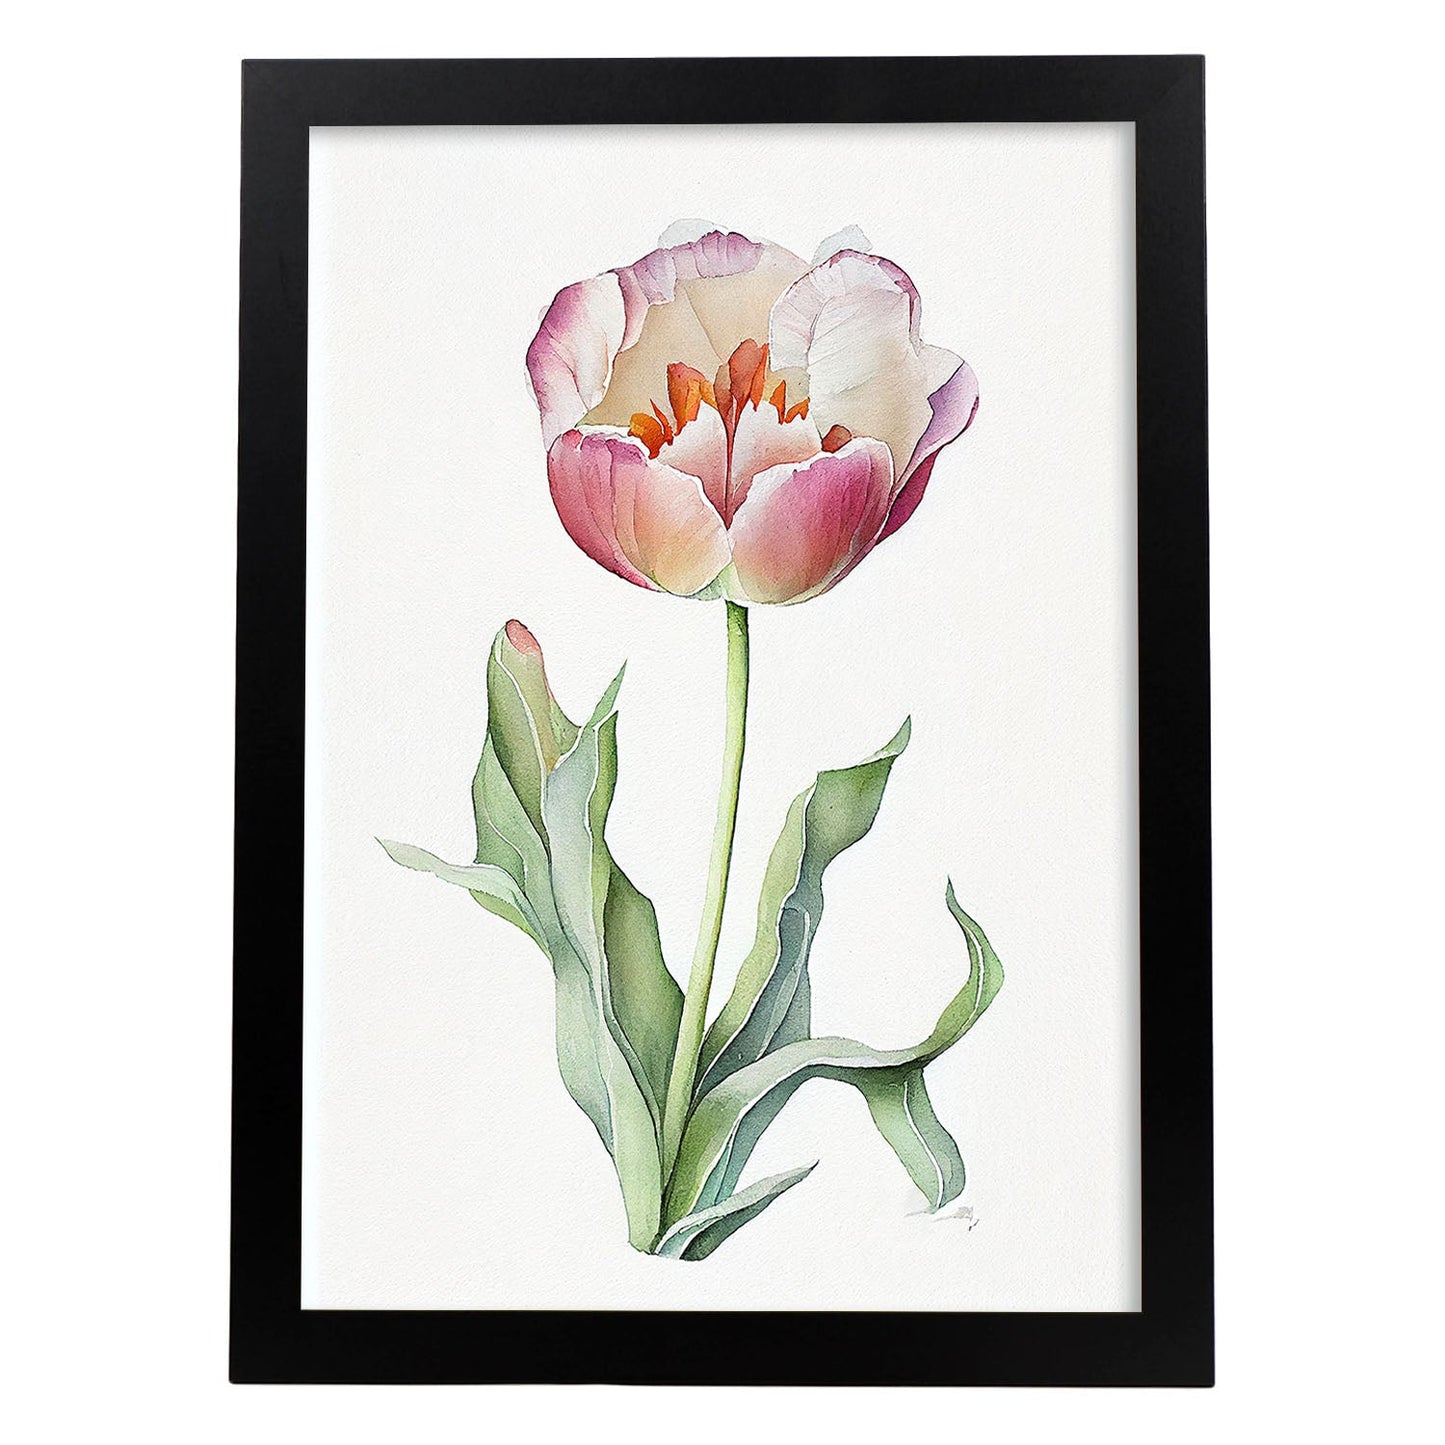 Nacnic watercolor minmal Tulip_3. Aesthetic Wall Art Prints for Bedroom or Living Room Design.